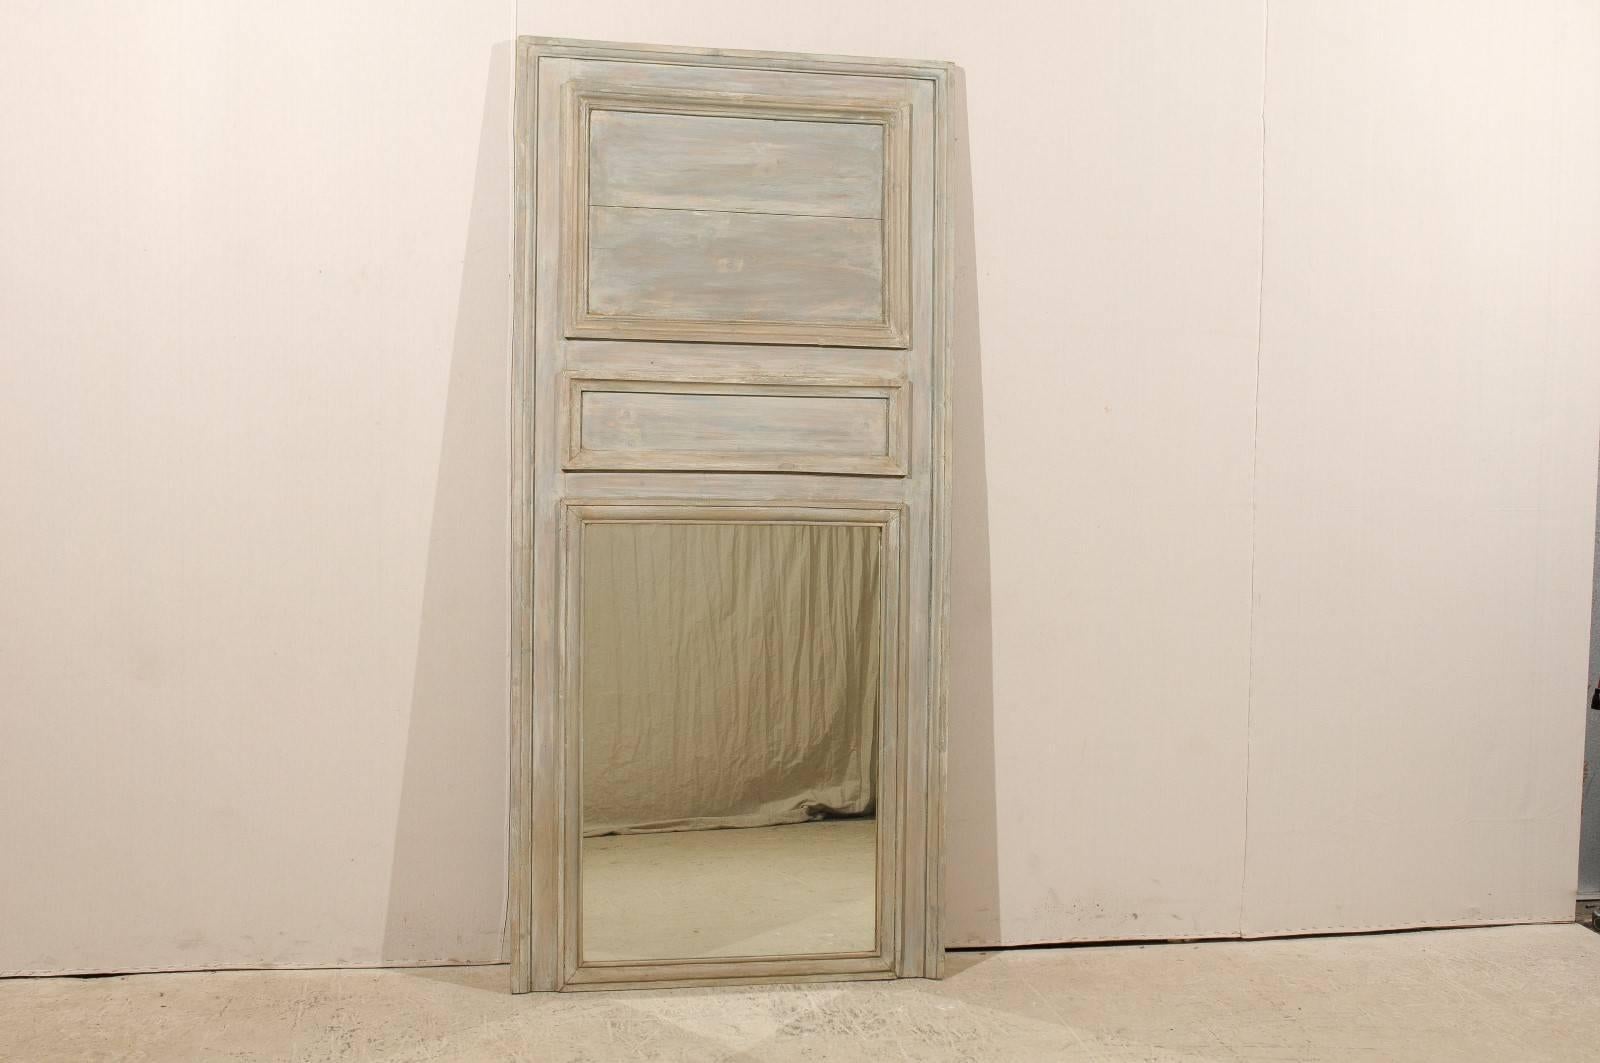 A French 19th century painted wood trumeau mirror. This mirror is adorned with two carved rectangular wooden panels of differing sizes at the top. It is painted in neutral soft taupe, grey and blue colors. This French mirror would add the perfect